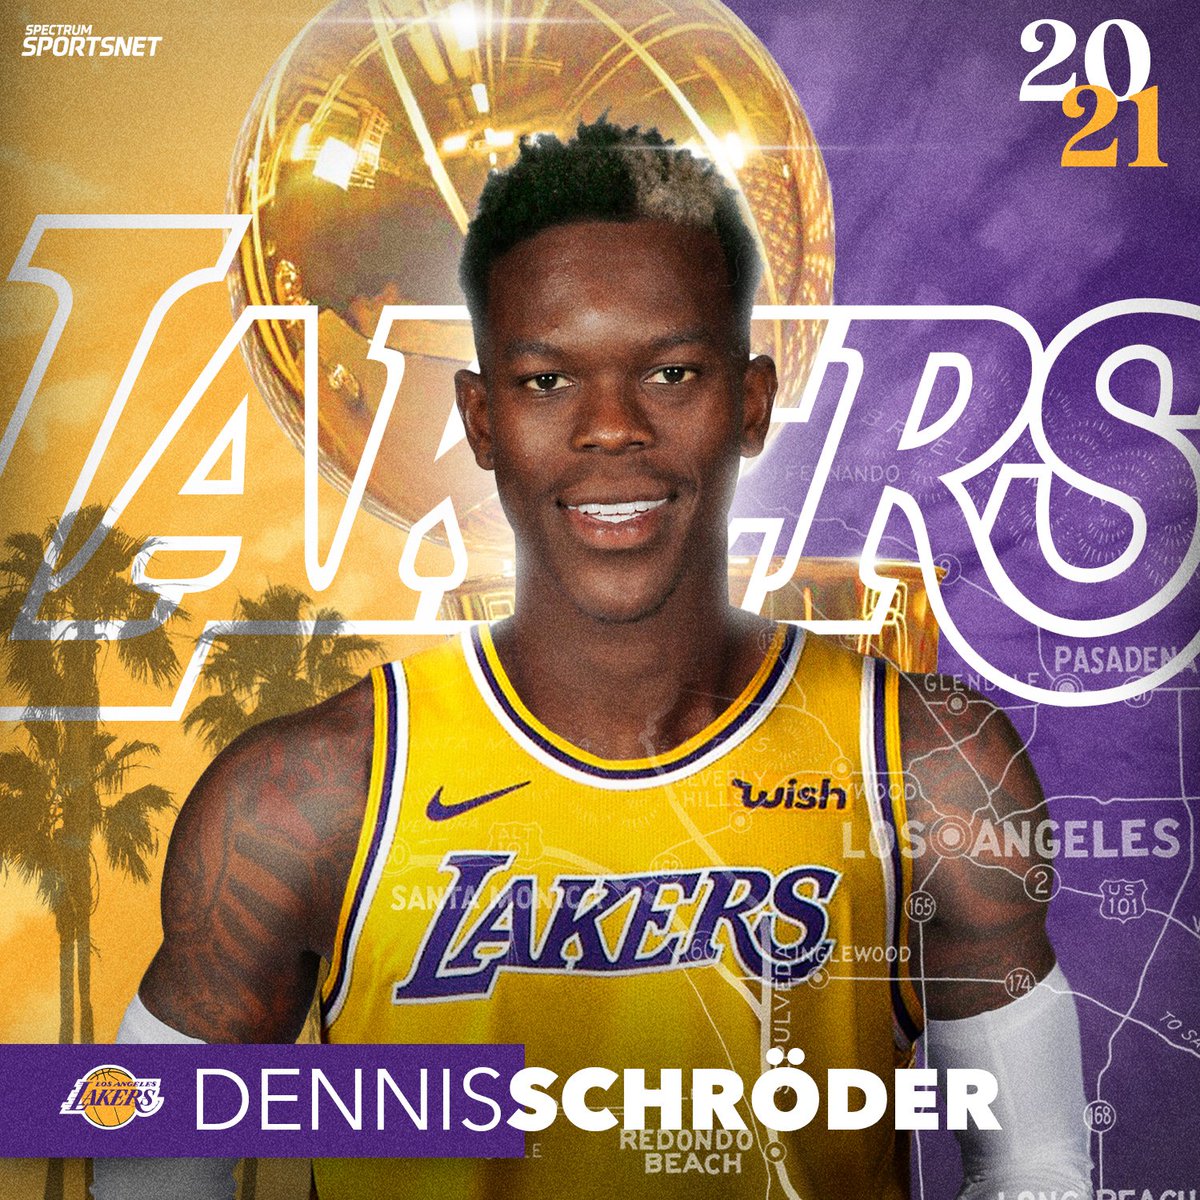 Spectrum Sportsnet On Twitter It S Official Dennis Schroder Is Now A Member Of The Lakers